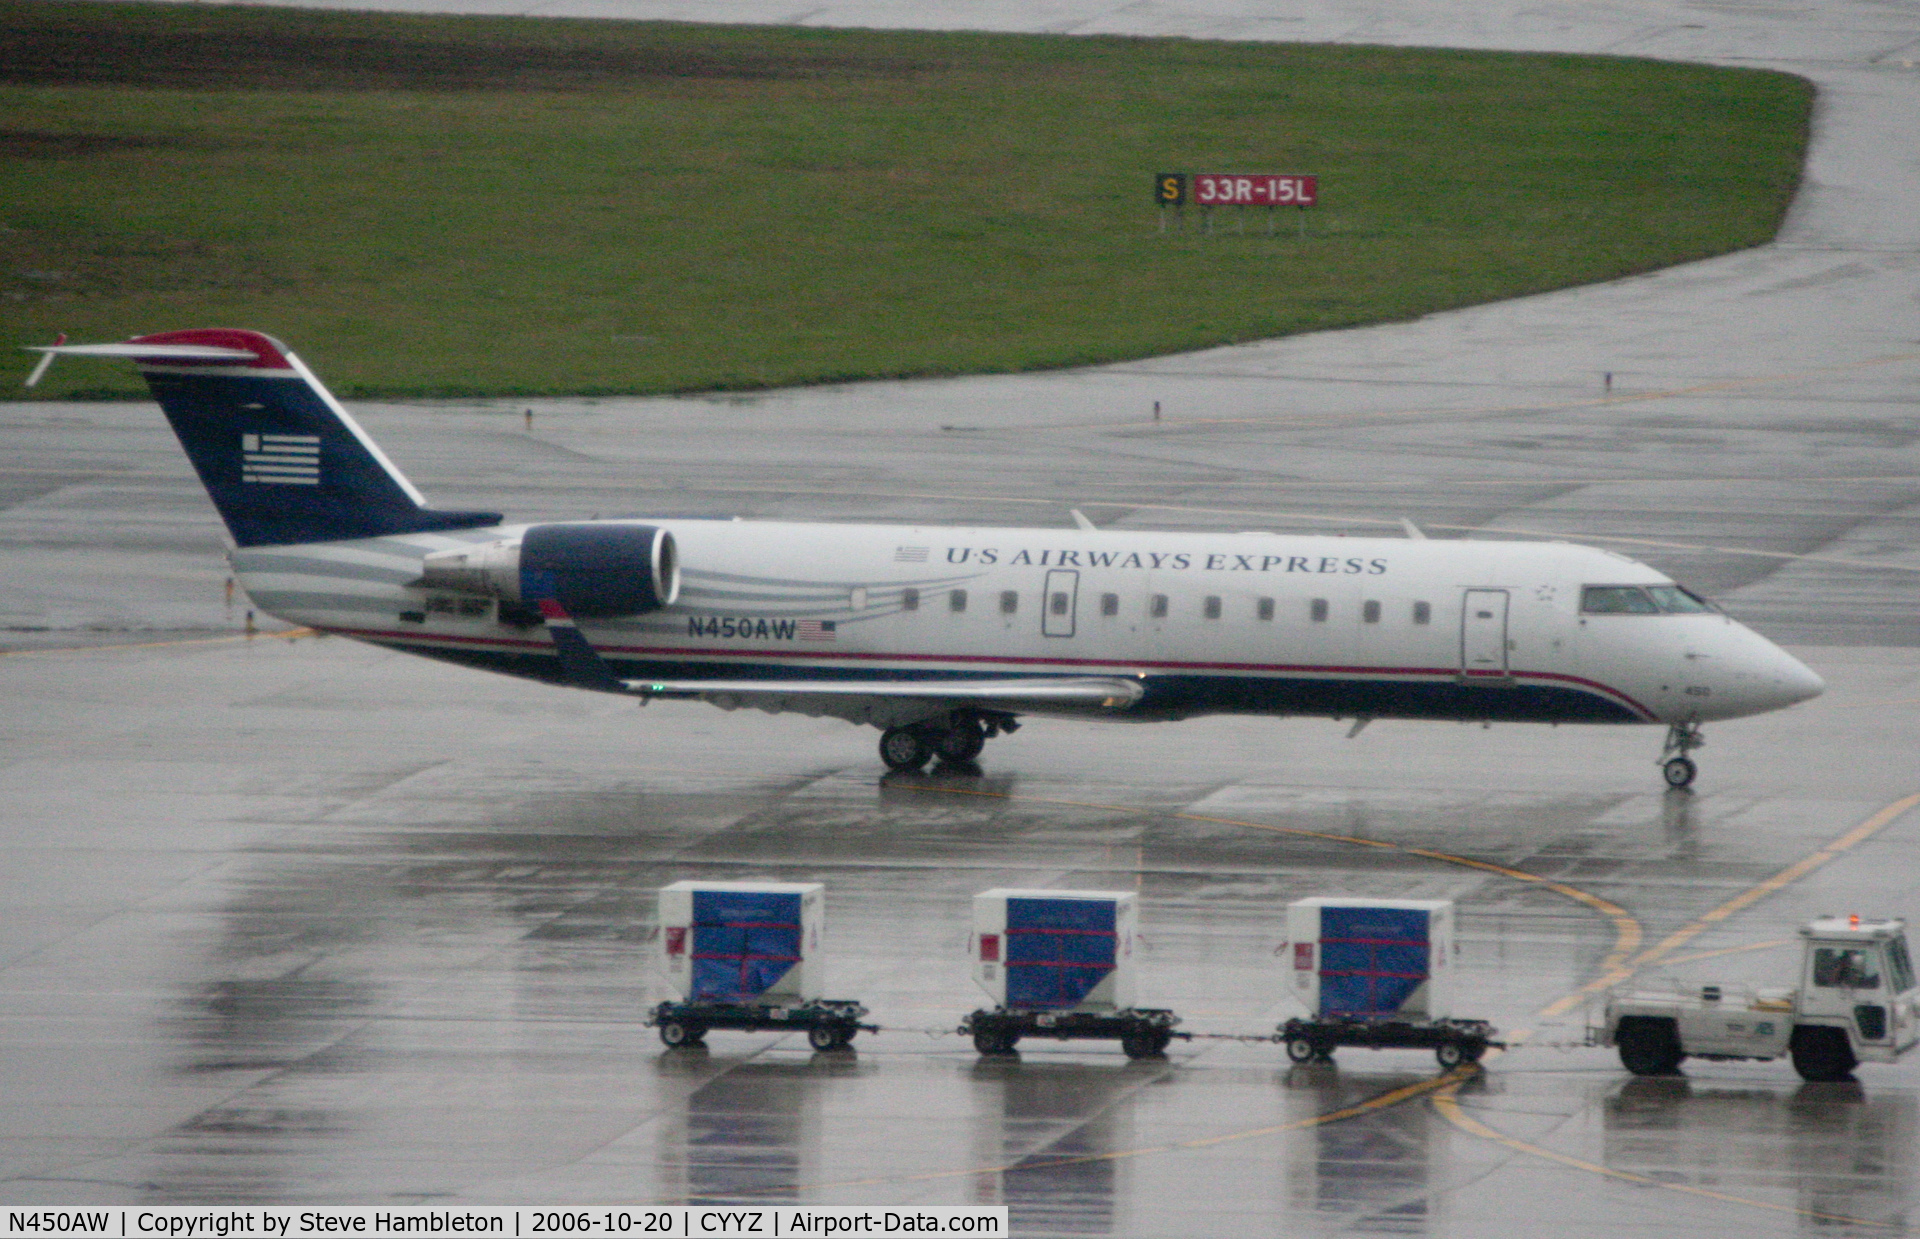 N450AW, 2003 Bombardier CRJ-200LR (CL-600-2B19) C/N 7823, A miserable day at Toronto